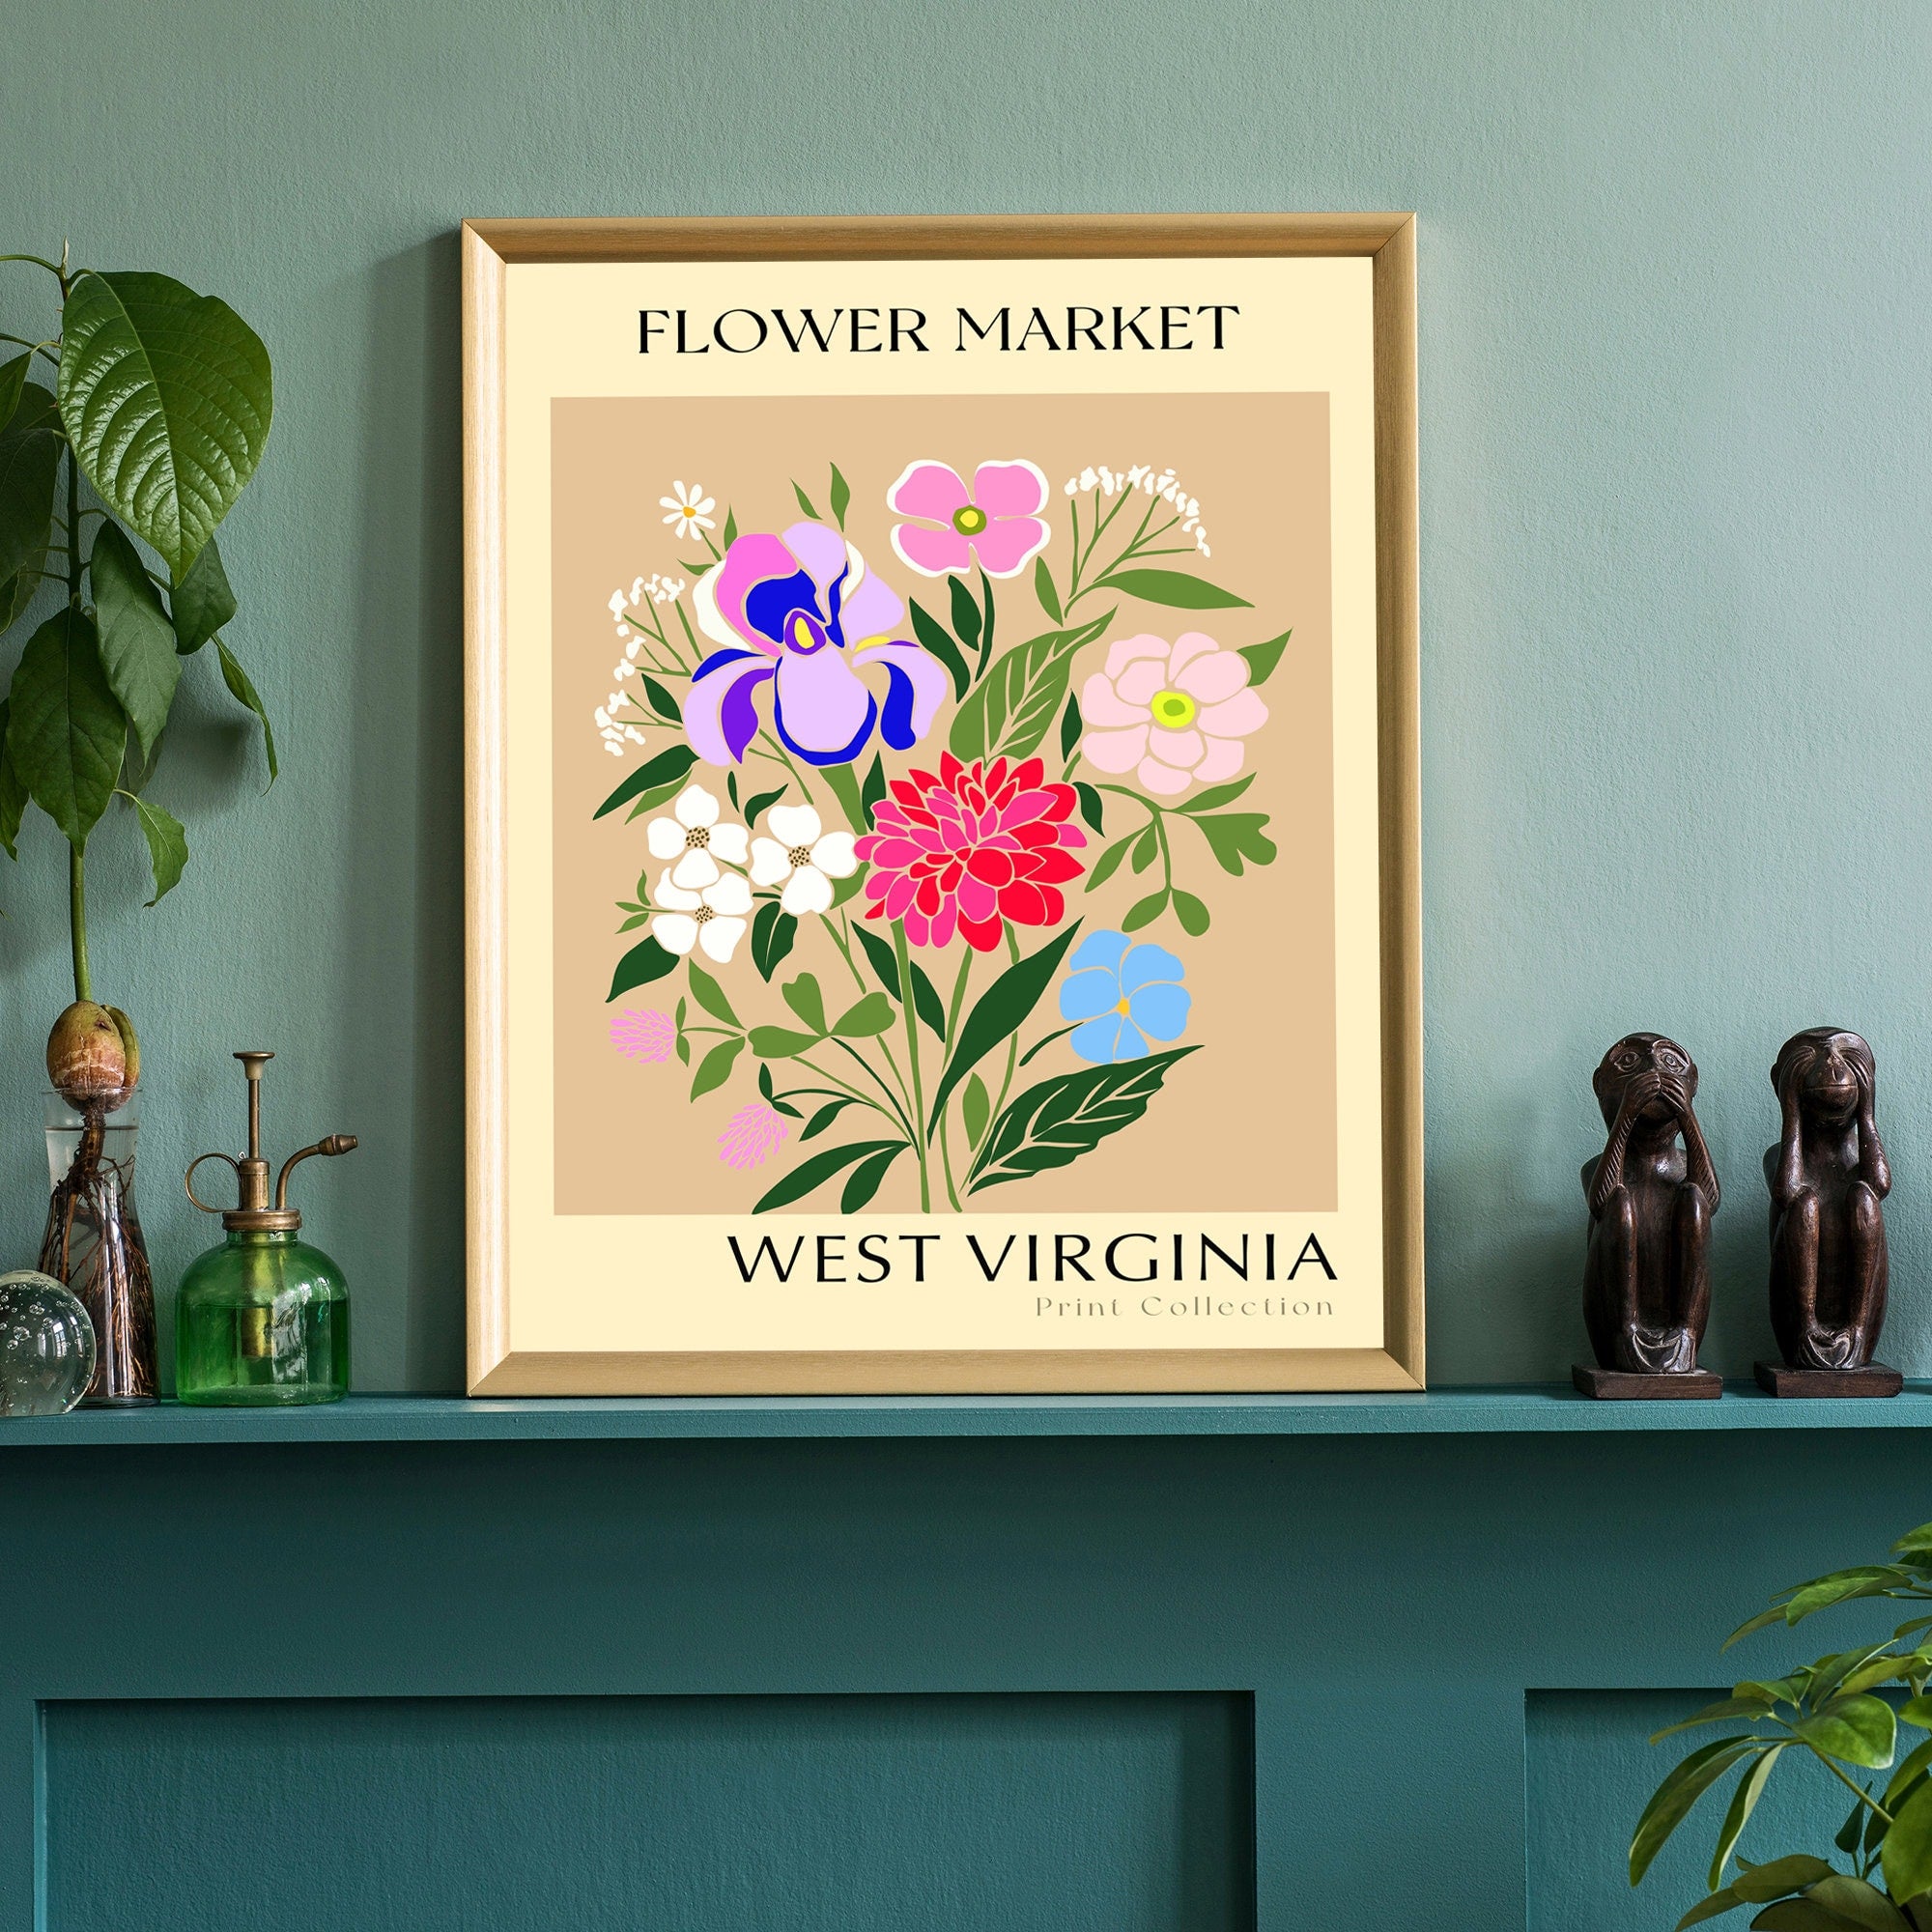 West Virginia State flower print, USA states poster, West Virginia flower market poster, Botanical poster, Nature floral poster artwork